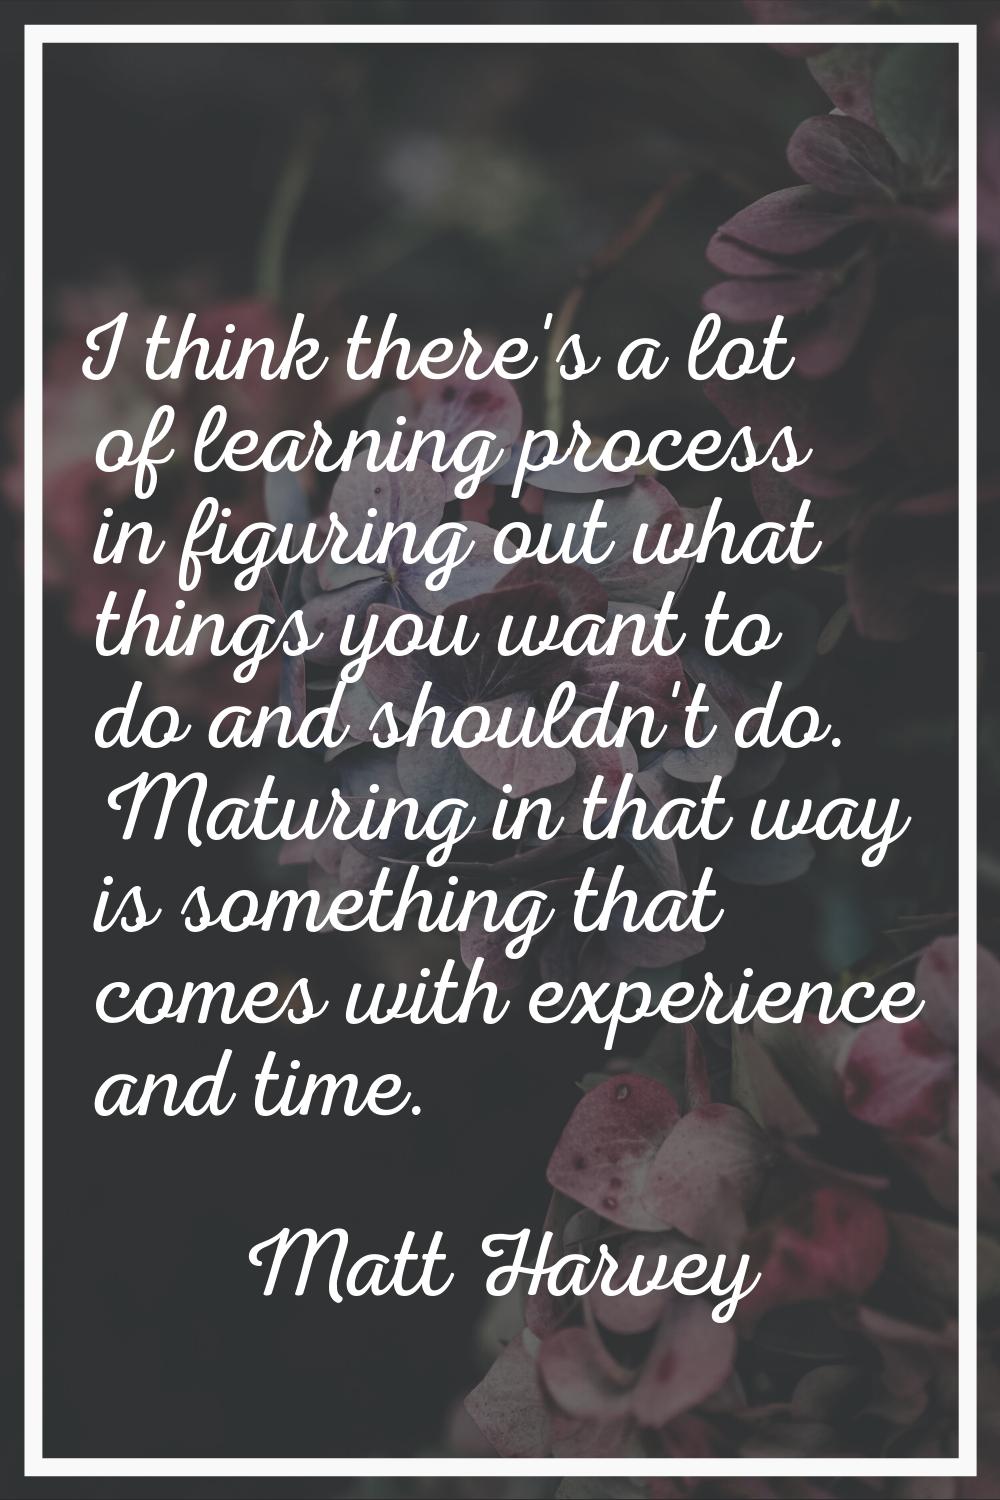 I think there's a lot of learning process in figuring out what things you want to do and shouldn't 